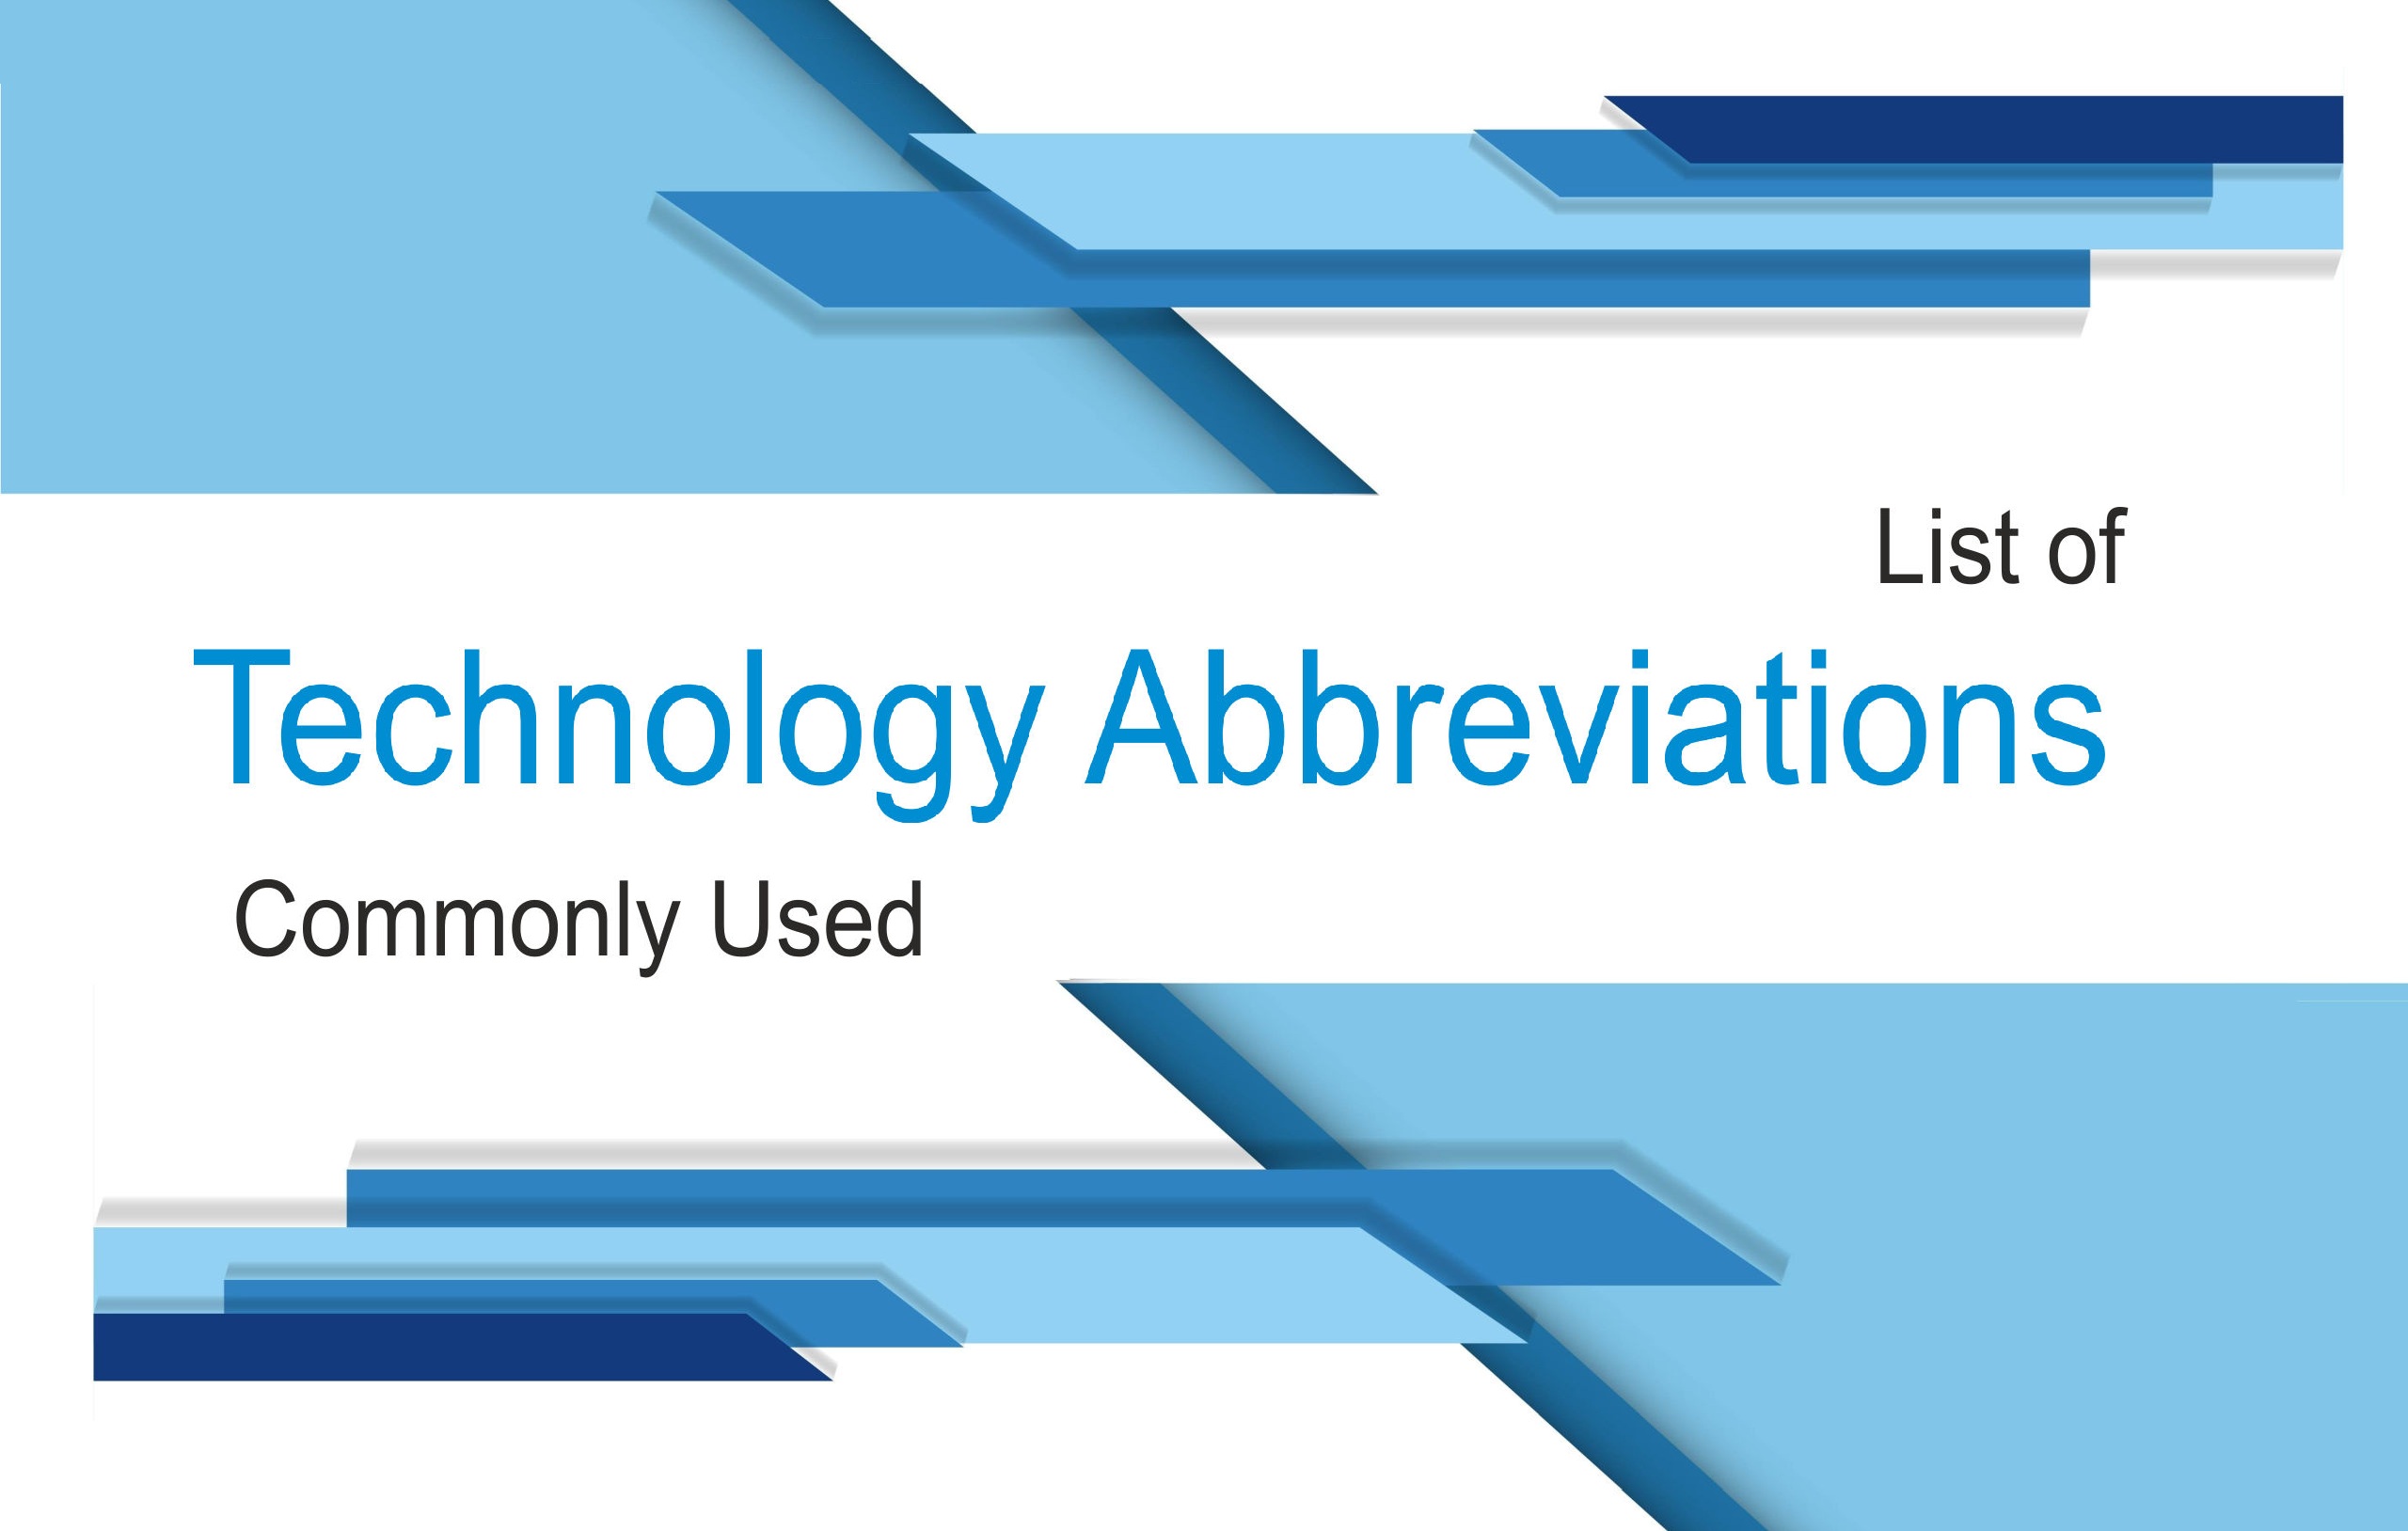 List of Technology Abbreviations Commonly Used